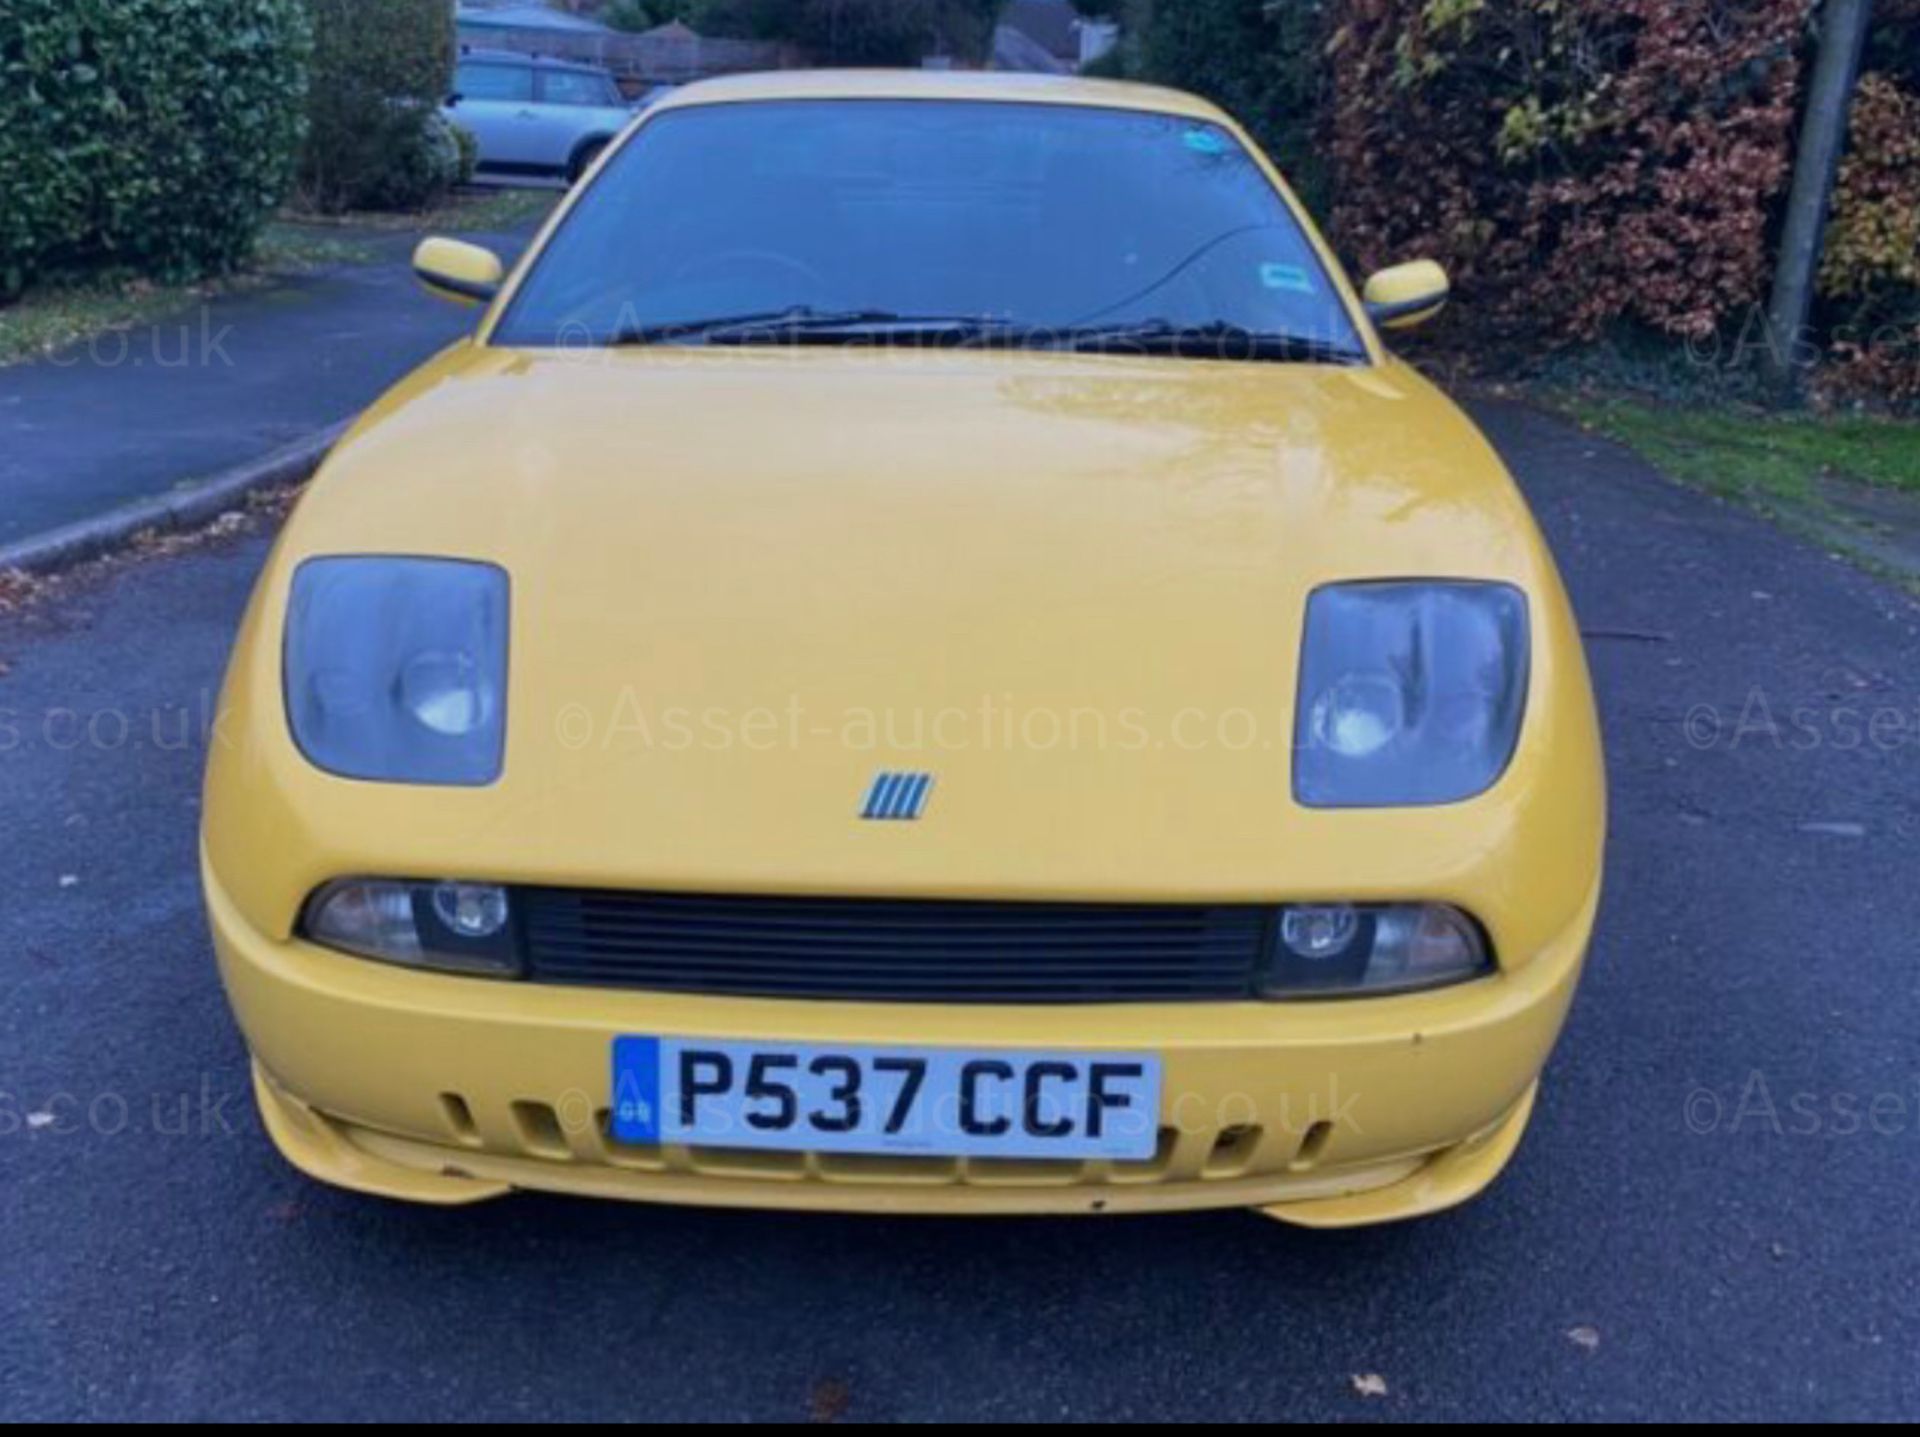 1996 FIAT COUPE 20V TURBO YELLOW SALOON, 2.0 PETROL ENGINE, SHOWING 95K MILES *NO VAT* - Image 3 of 12